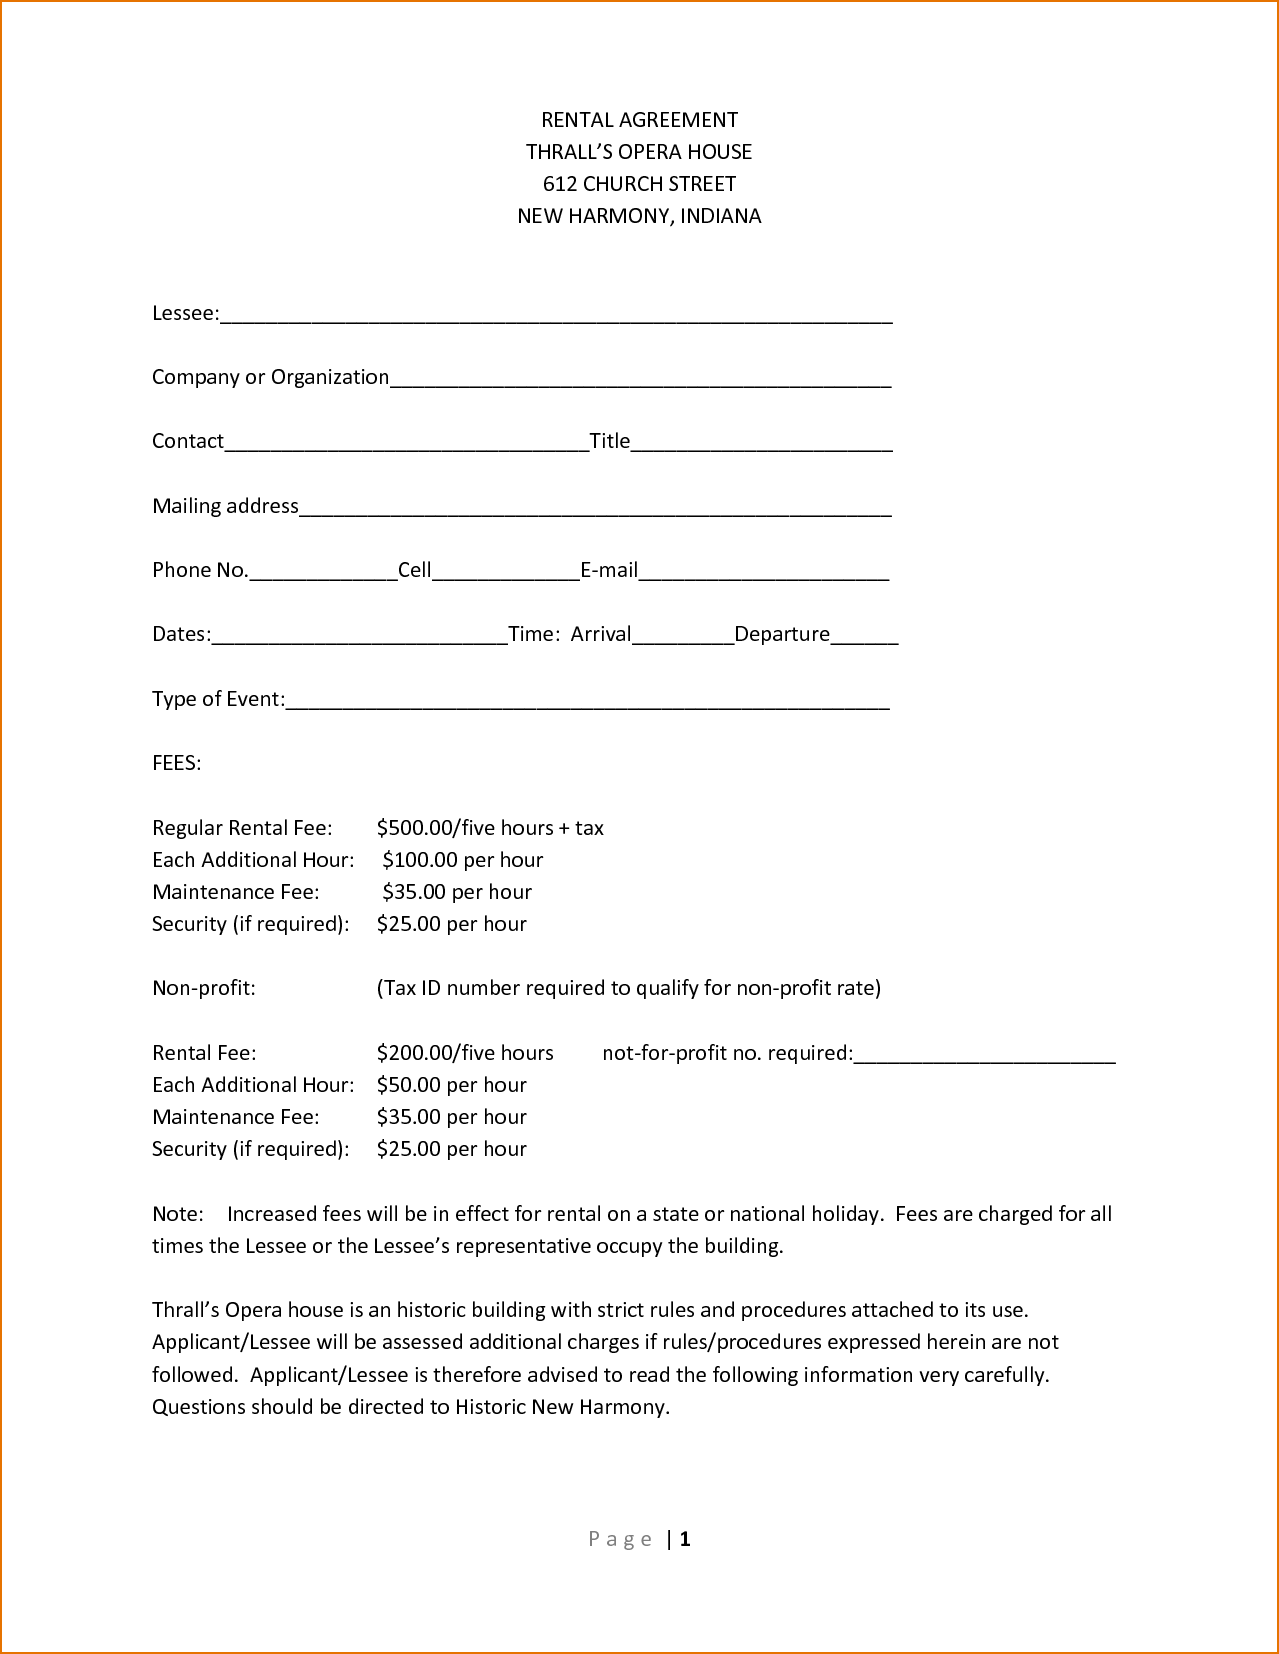 Simple Equipment Rental Agreement Template | aboutplanning.org